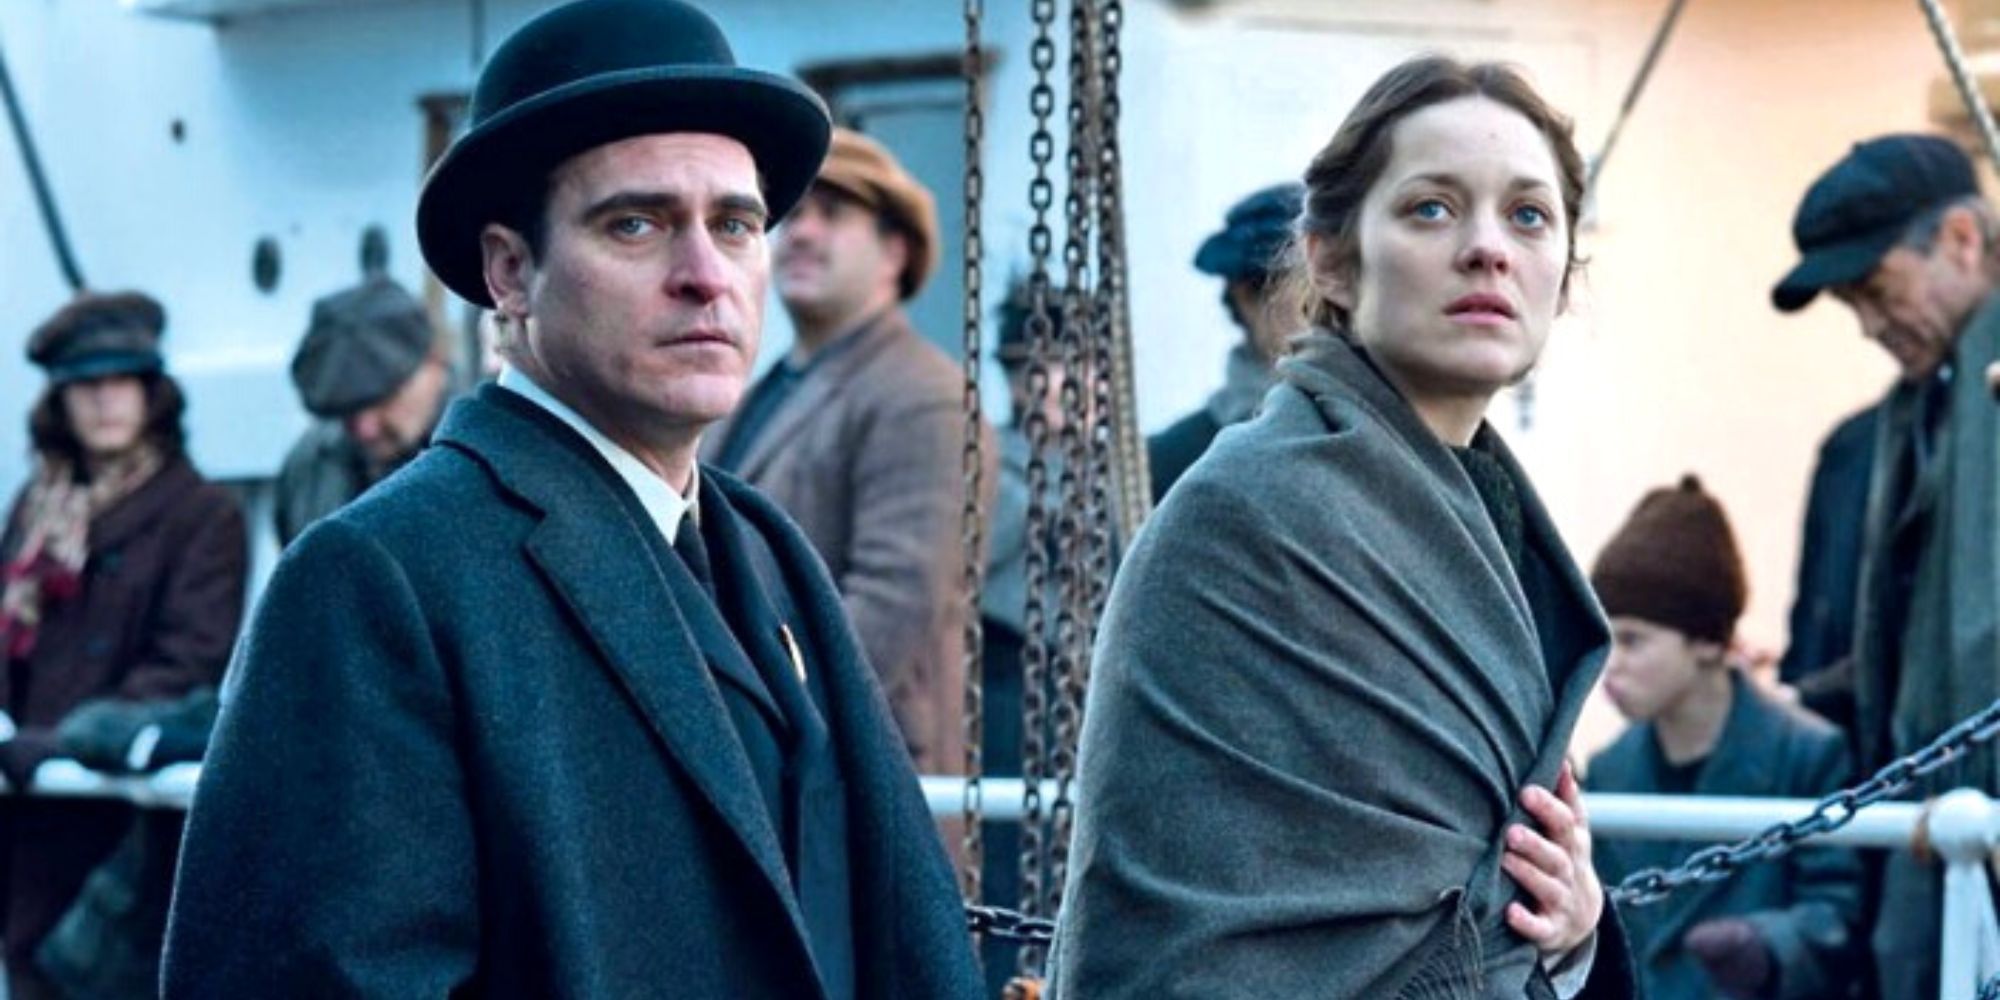 Joaquin Phoenix next to Marion Cotillard on a crowded boat in The Immigrant 